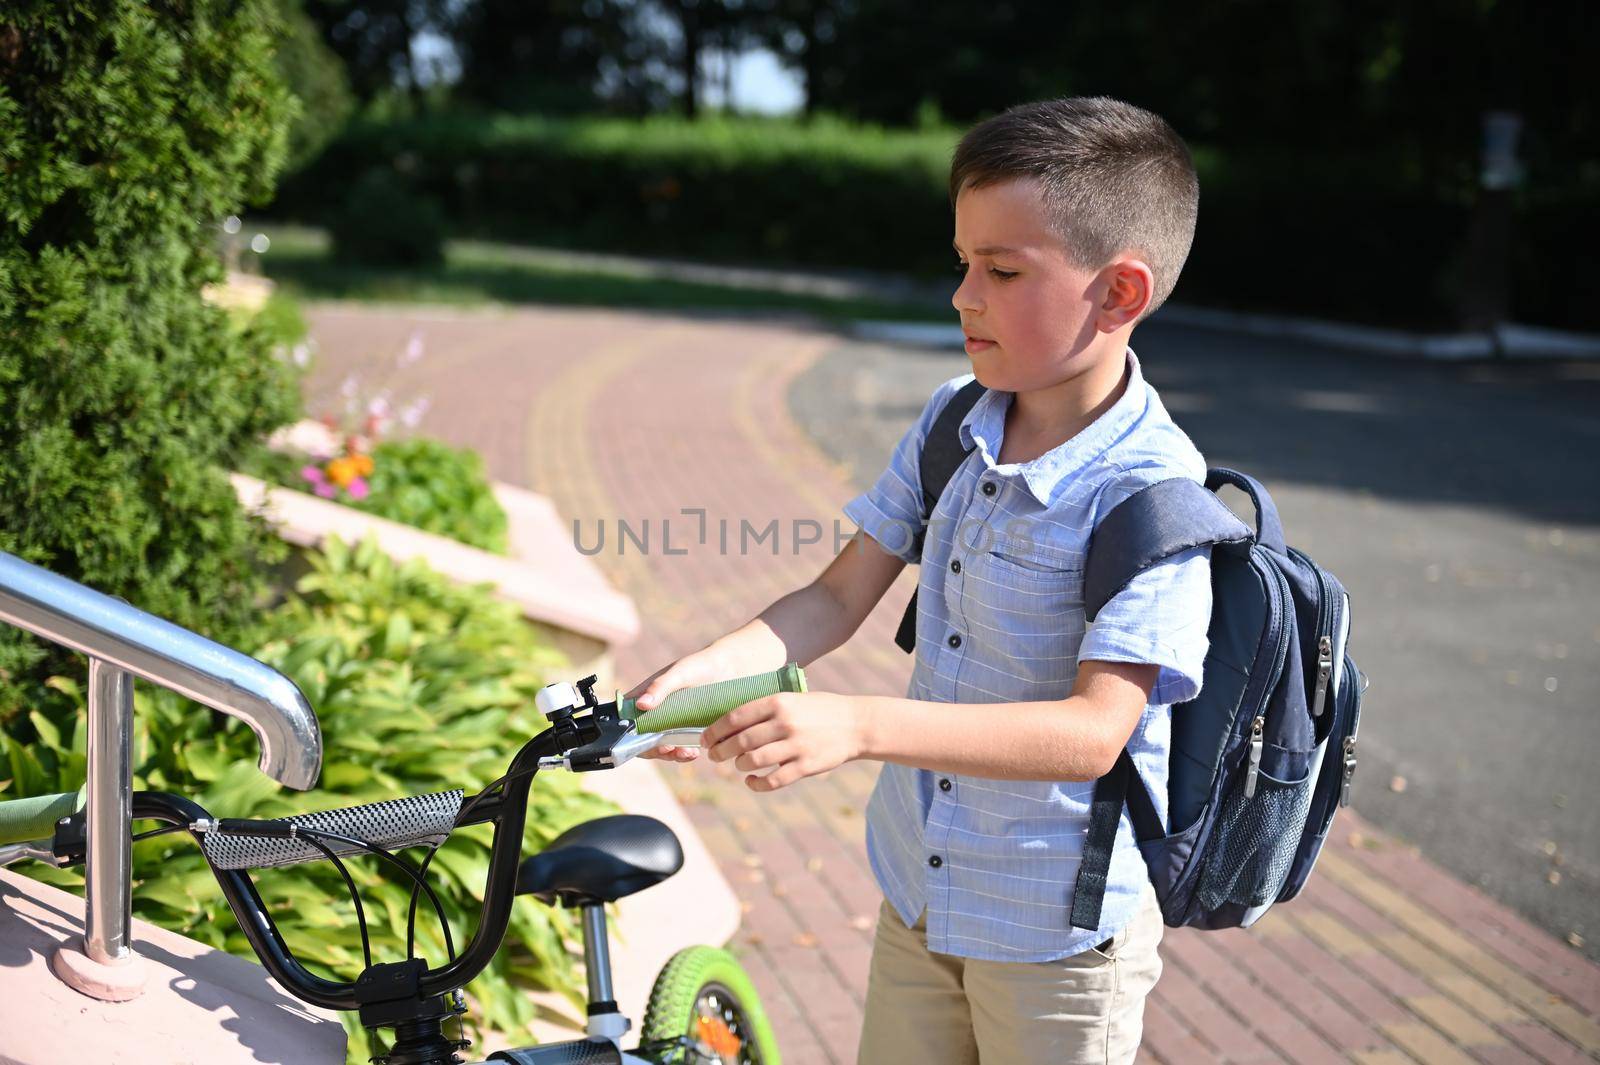 Adorable child parking his bike at school entrance. Handsome boy coming back to school